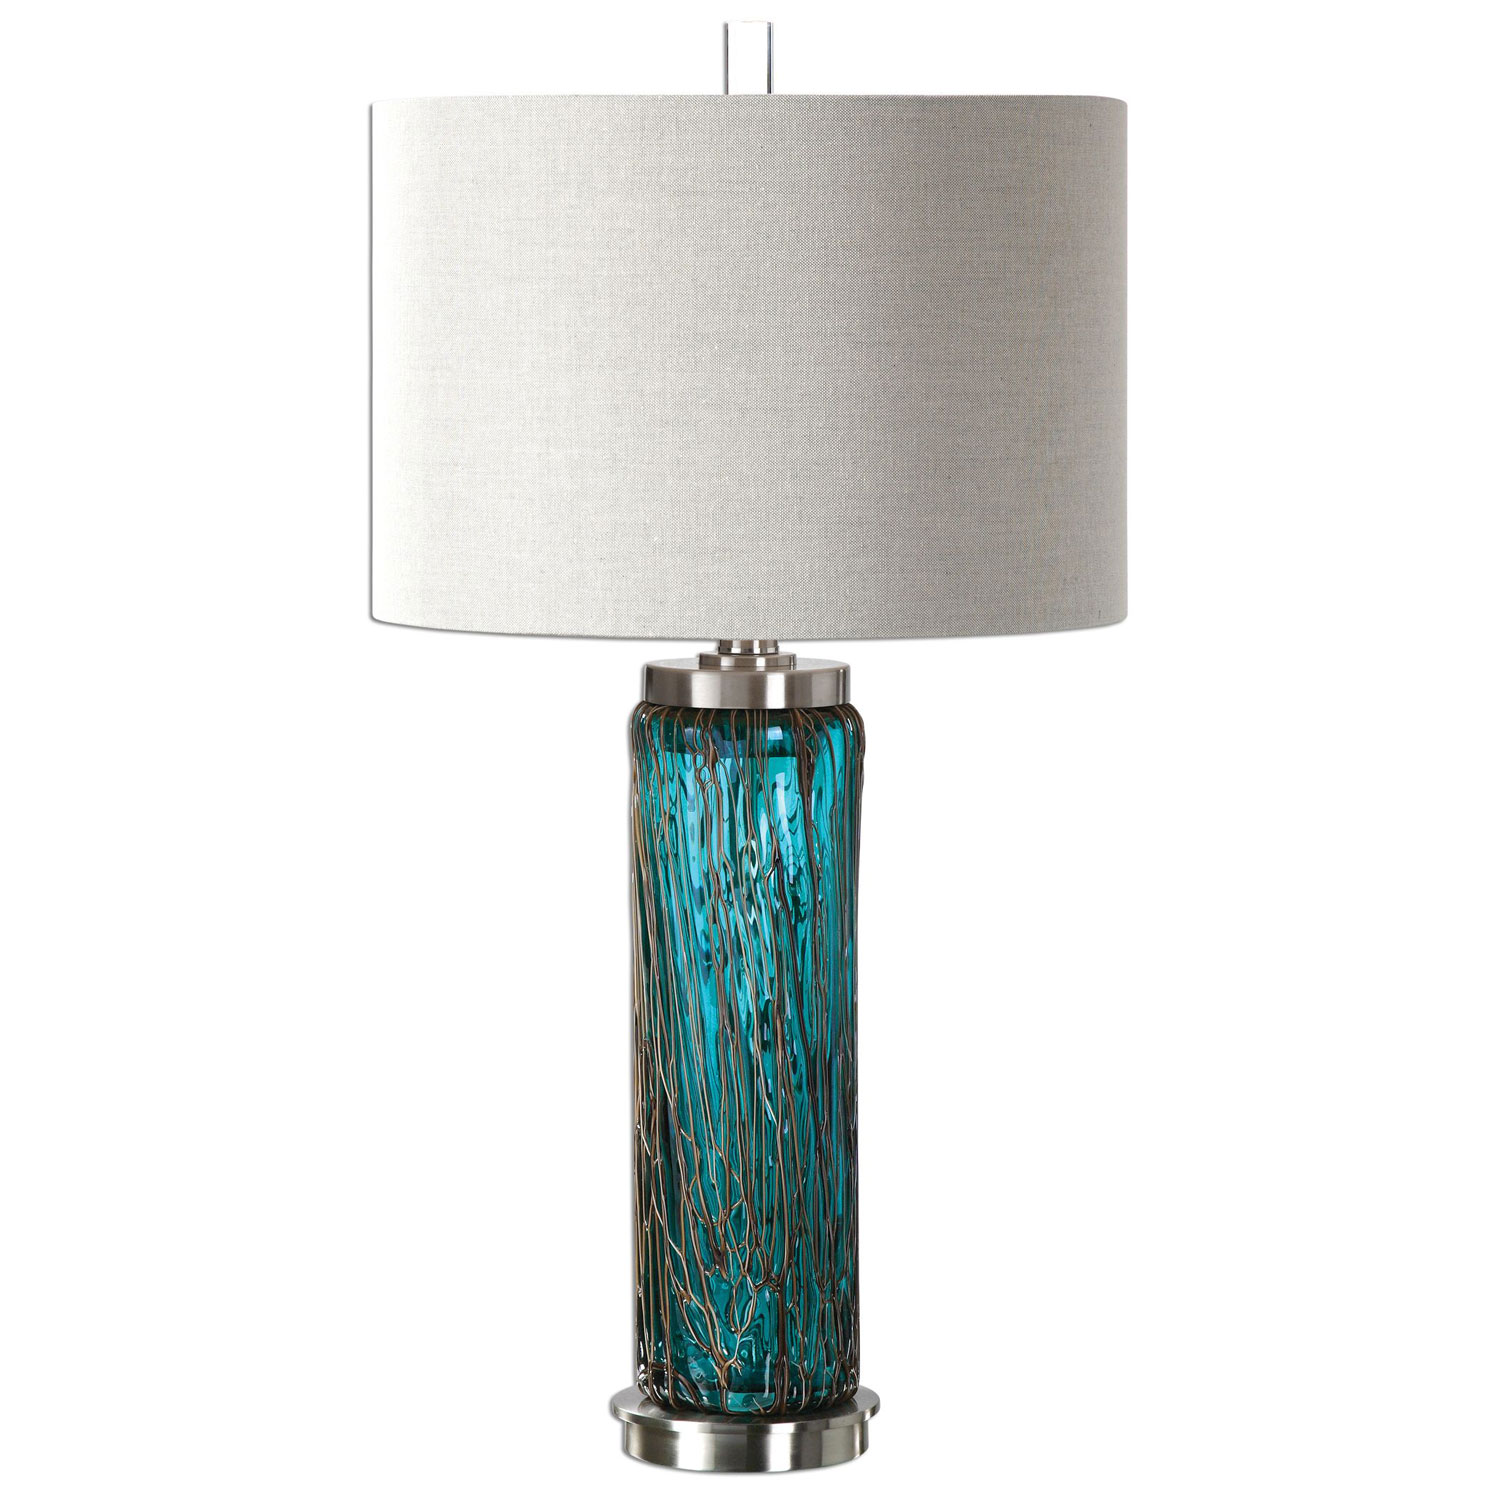 uttermost almanzora blue one light glass table lamp bellacor accent lamps hover zoom weathered grey end modern kitchen counter height dinette sets with built leather living room